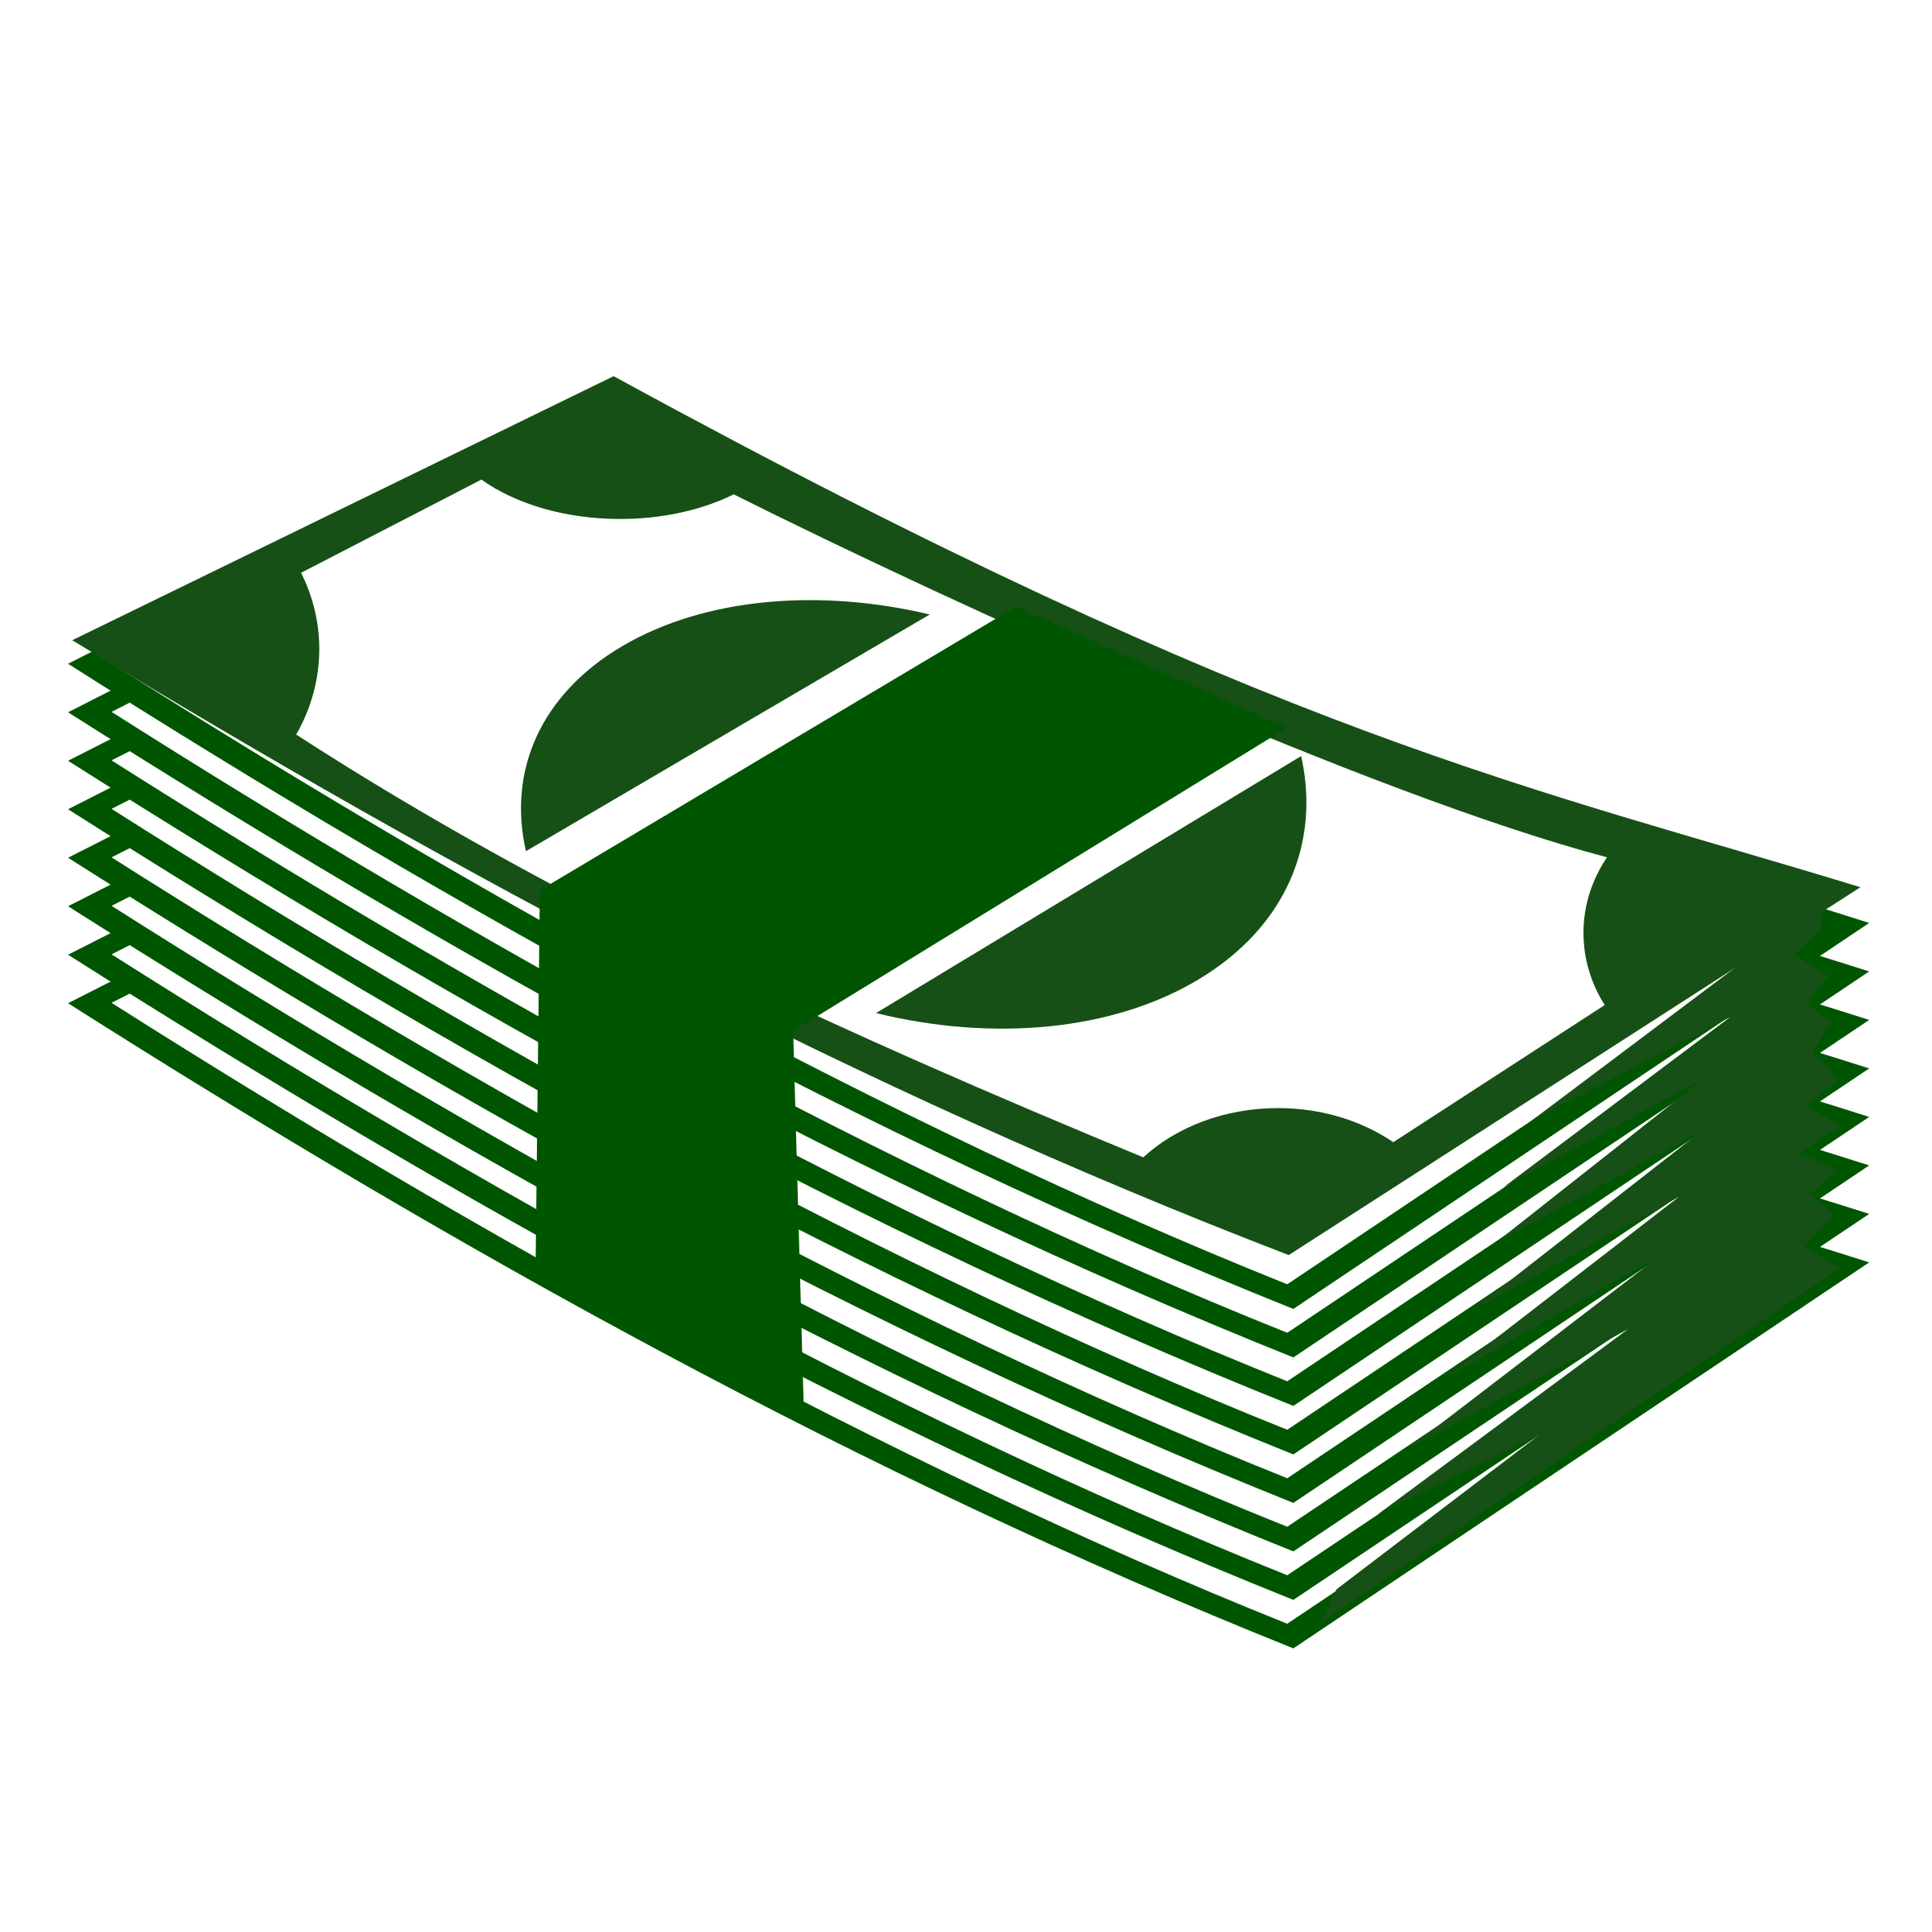 clipart of money images - photo #14